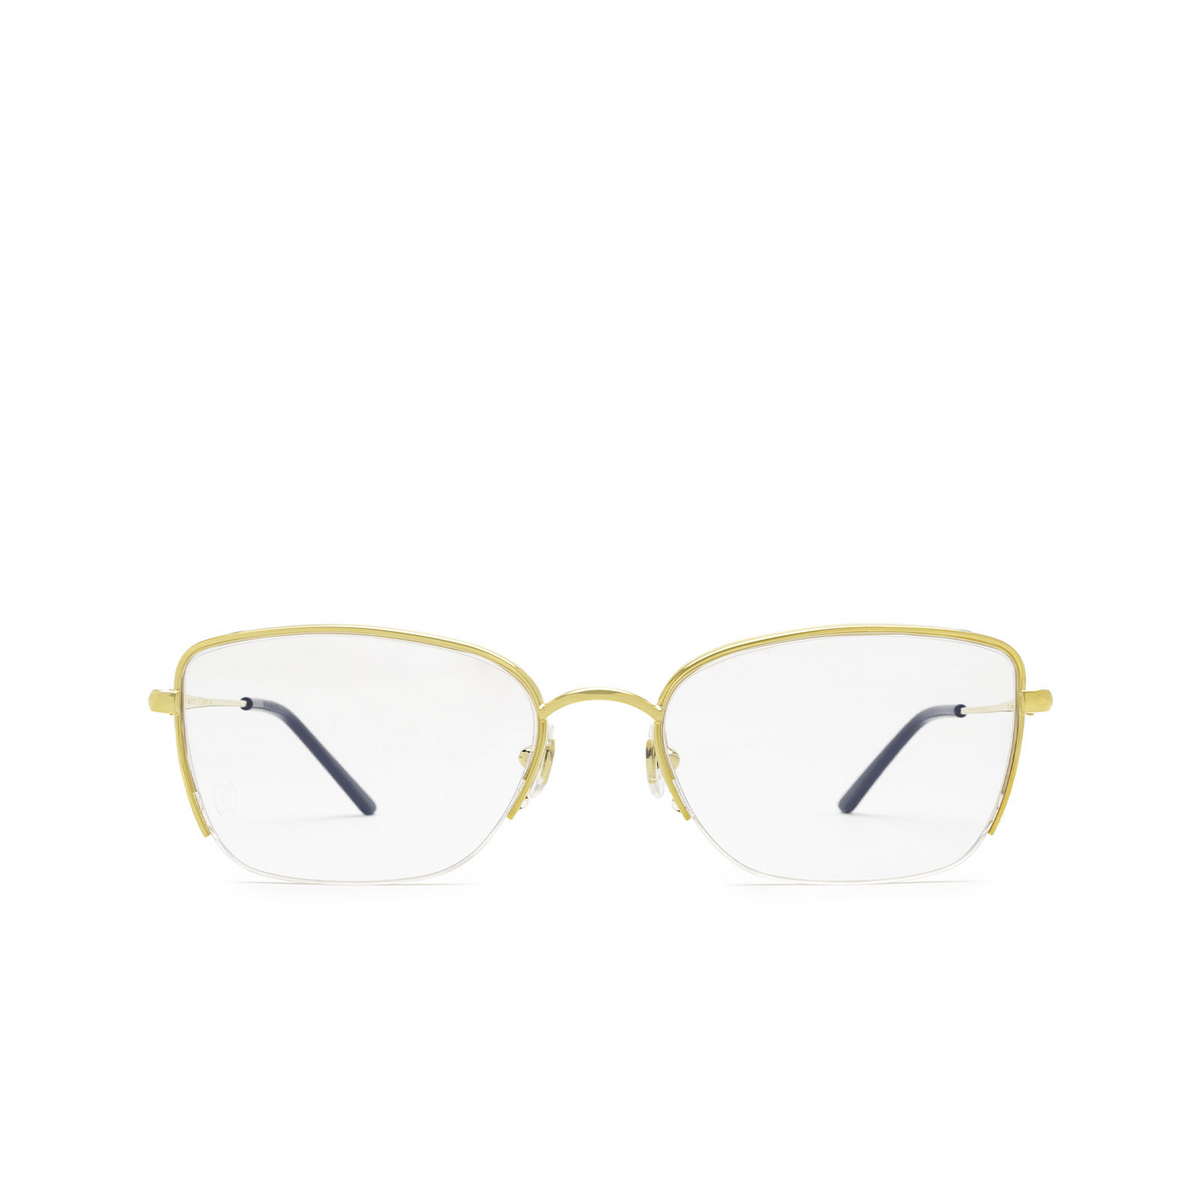 Cartier CT0311O Eyeglasses 001 Gold - front view